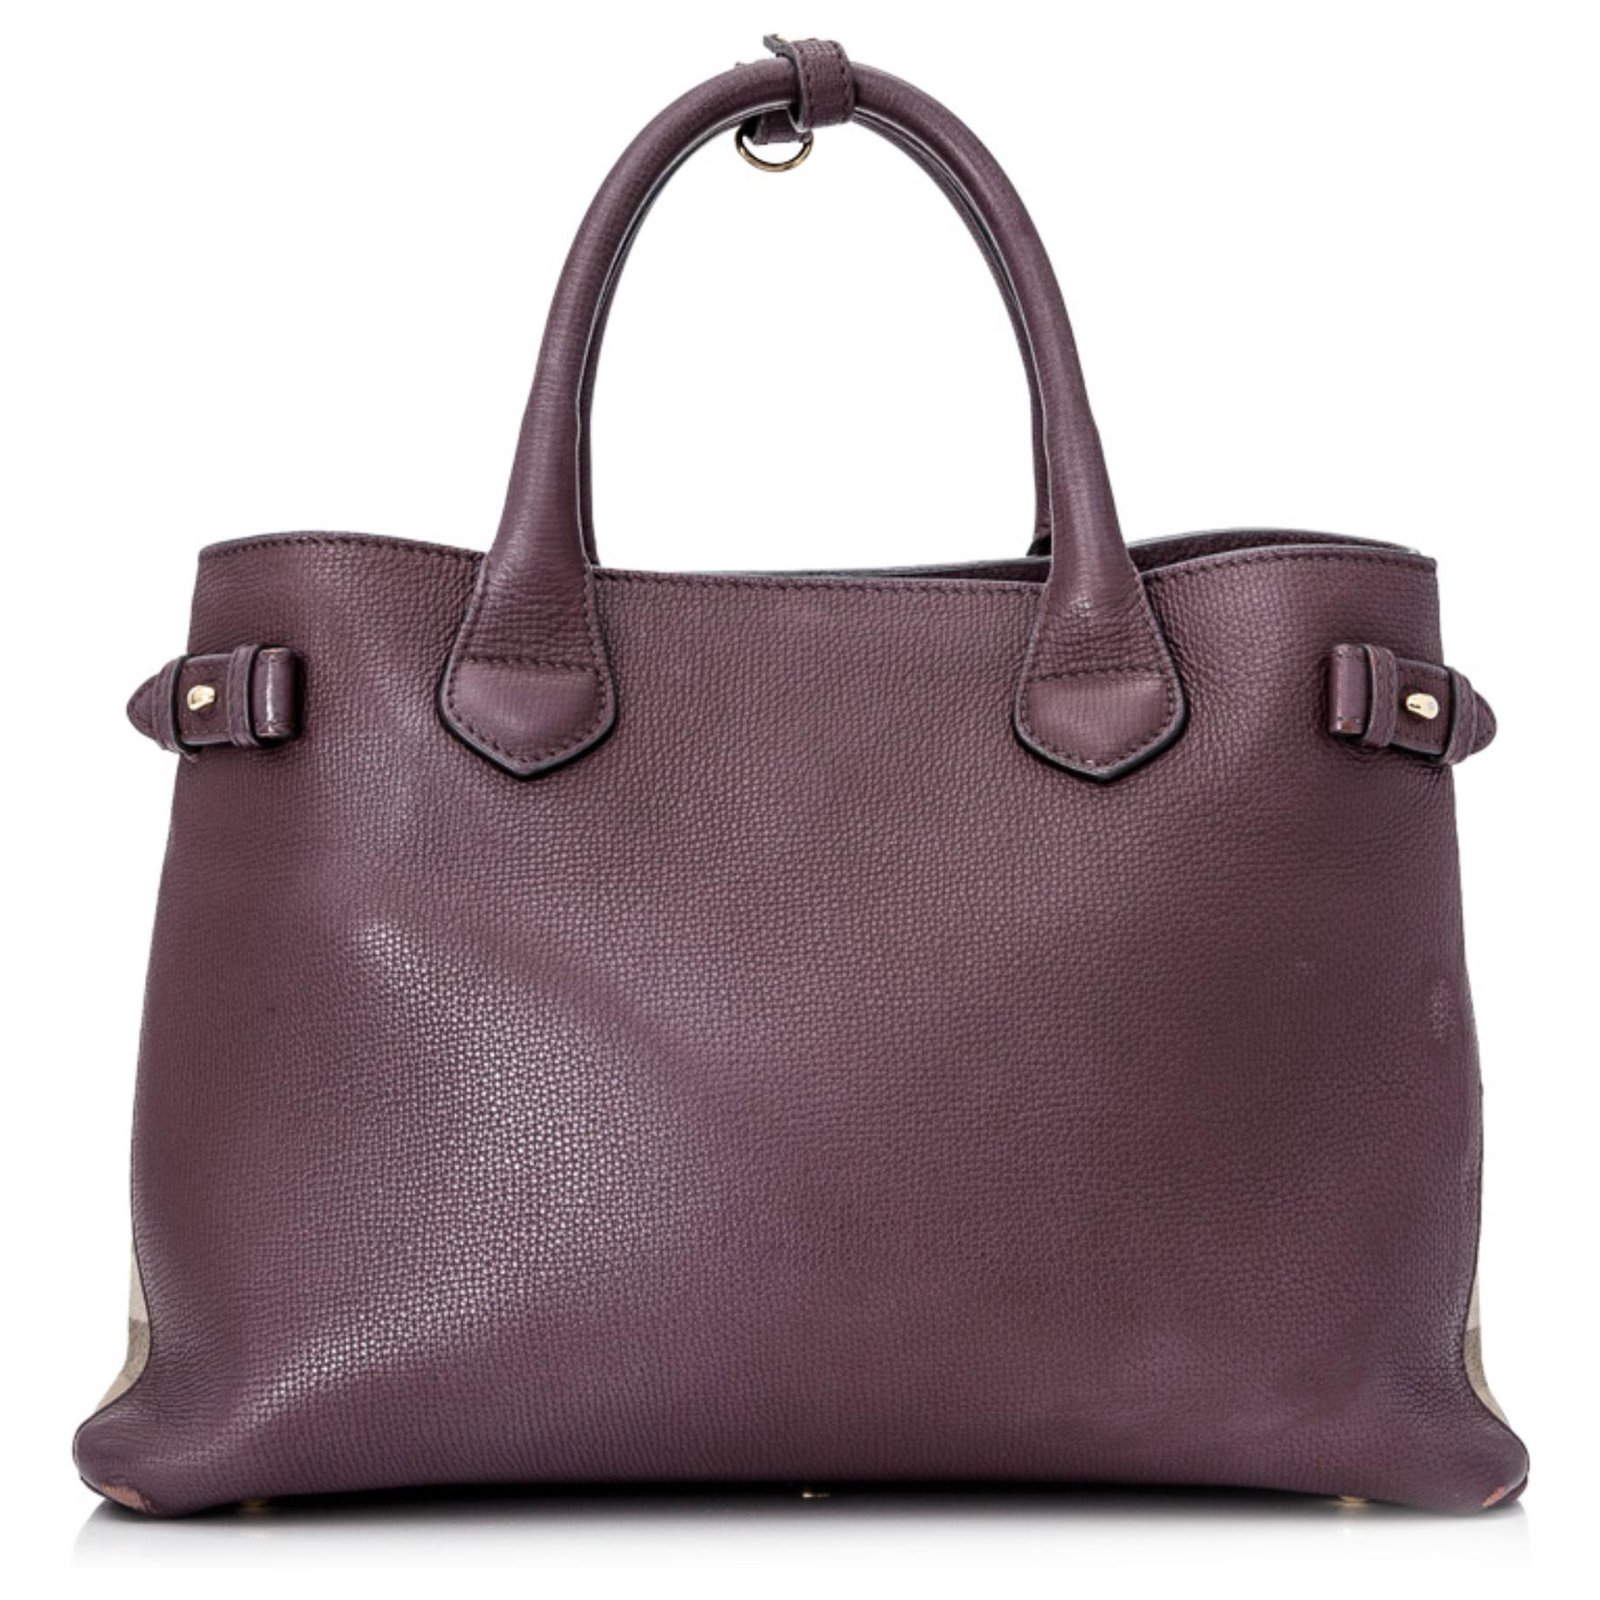 The Banner leather satchel